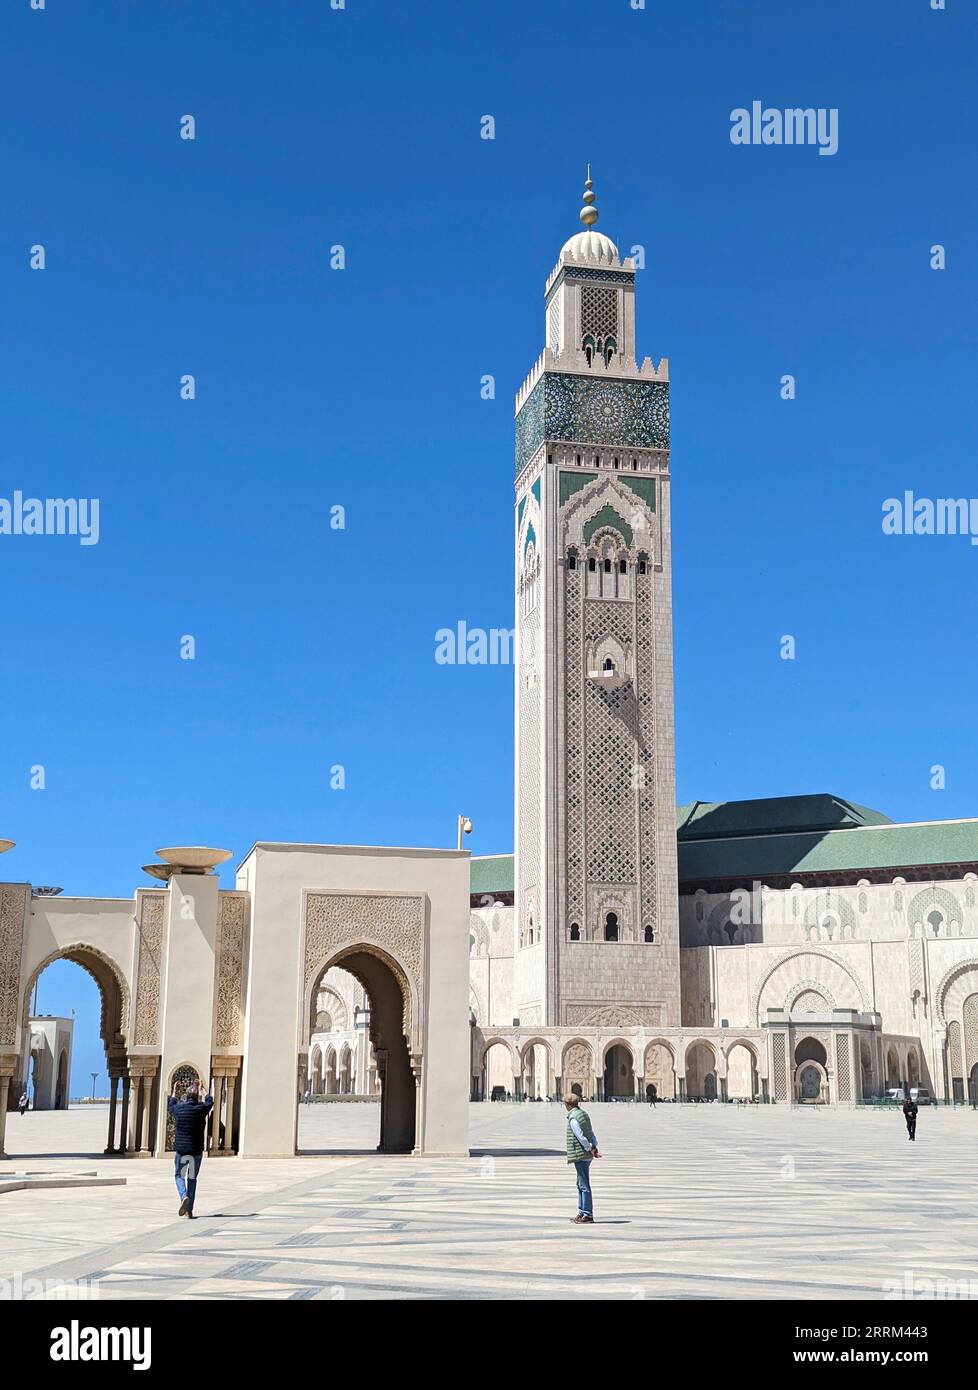 Exterior of the famous Hassan II Mosque at the coast of Casablanca, Morocco Stock Photo